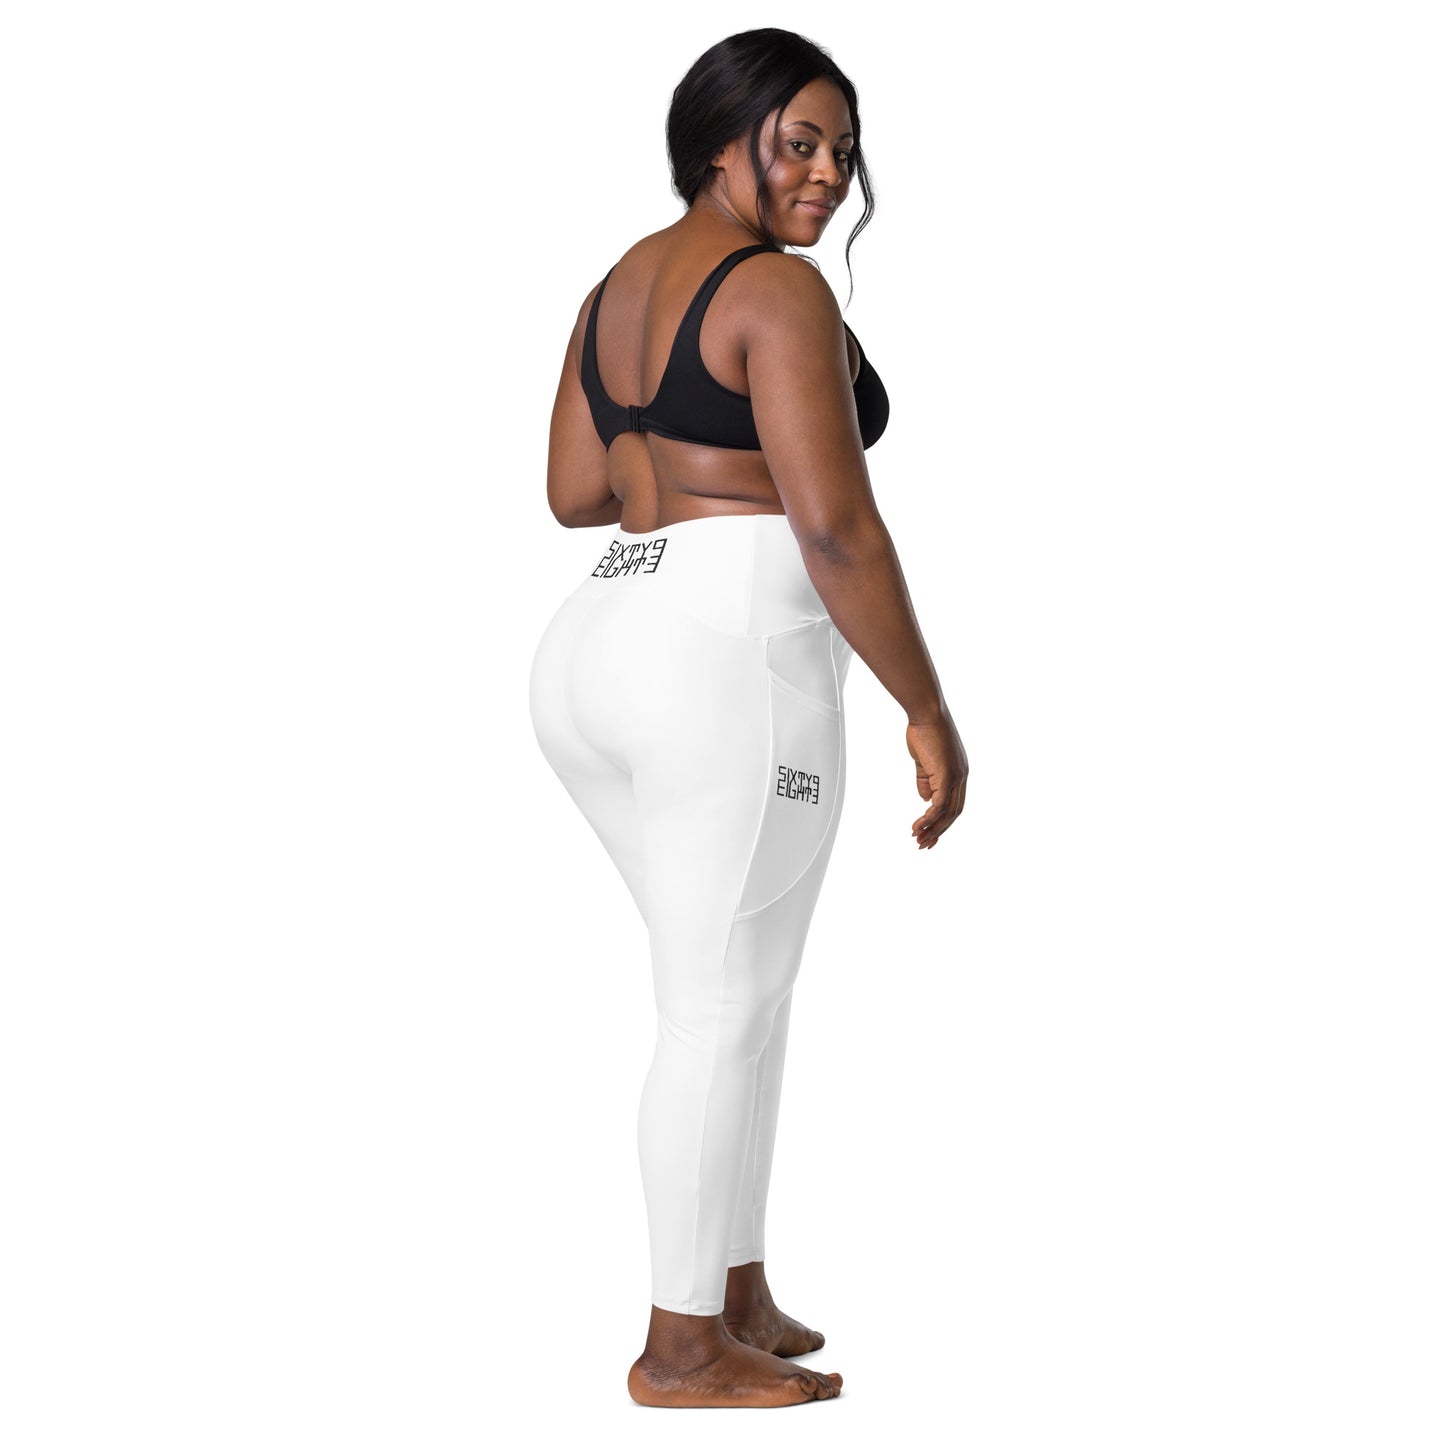 Sixty Eight 93 Logo Black White Crossover Leggings with pockets